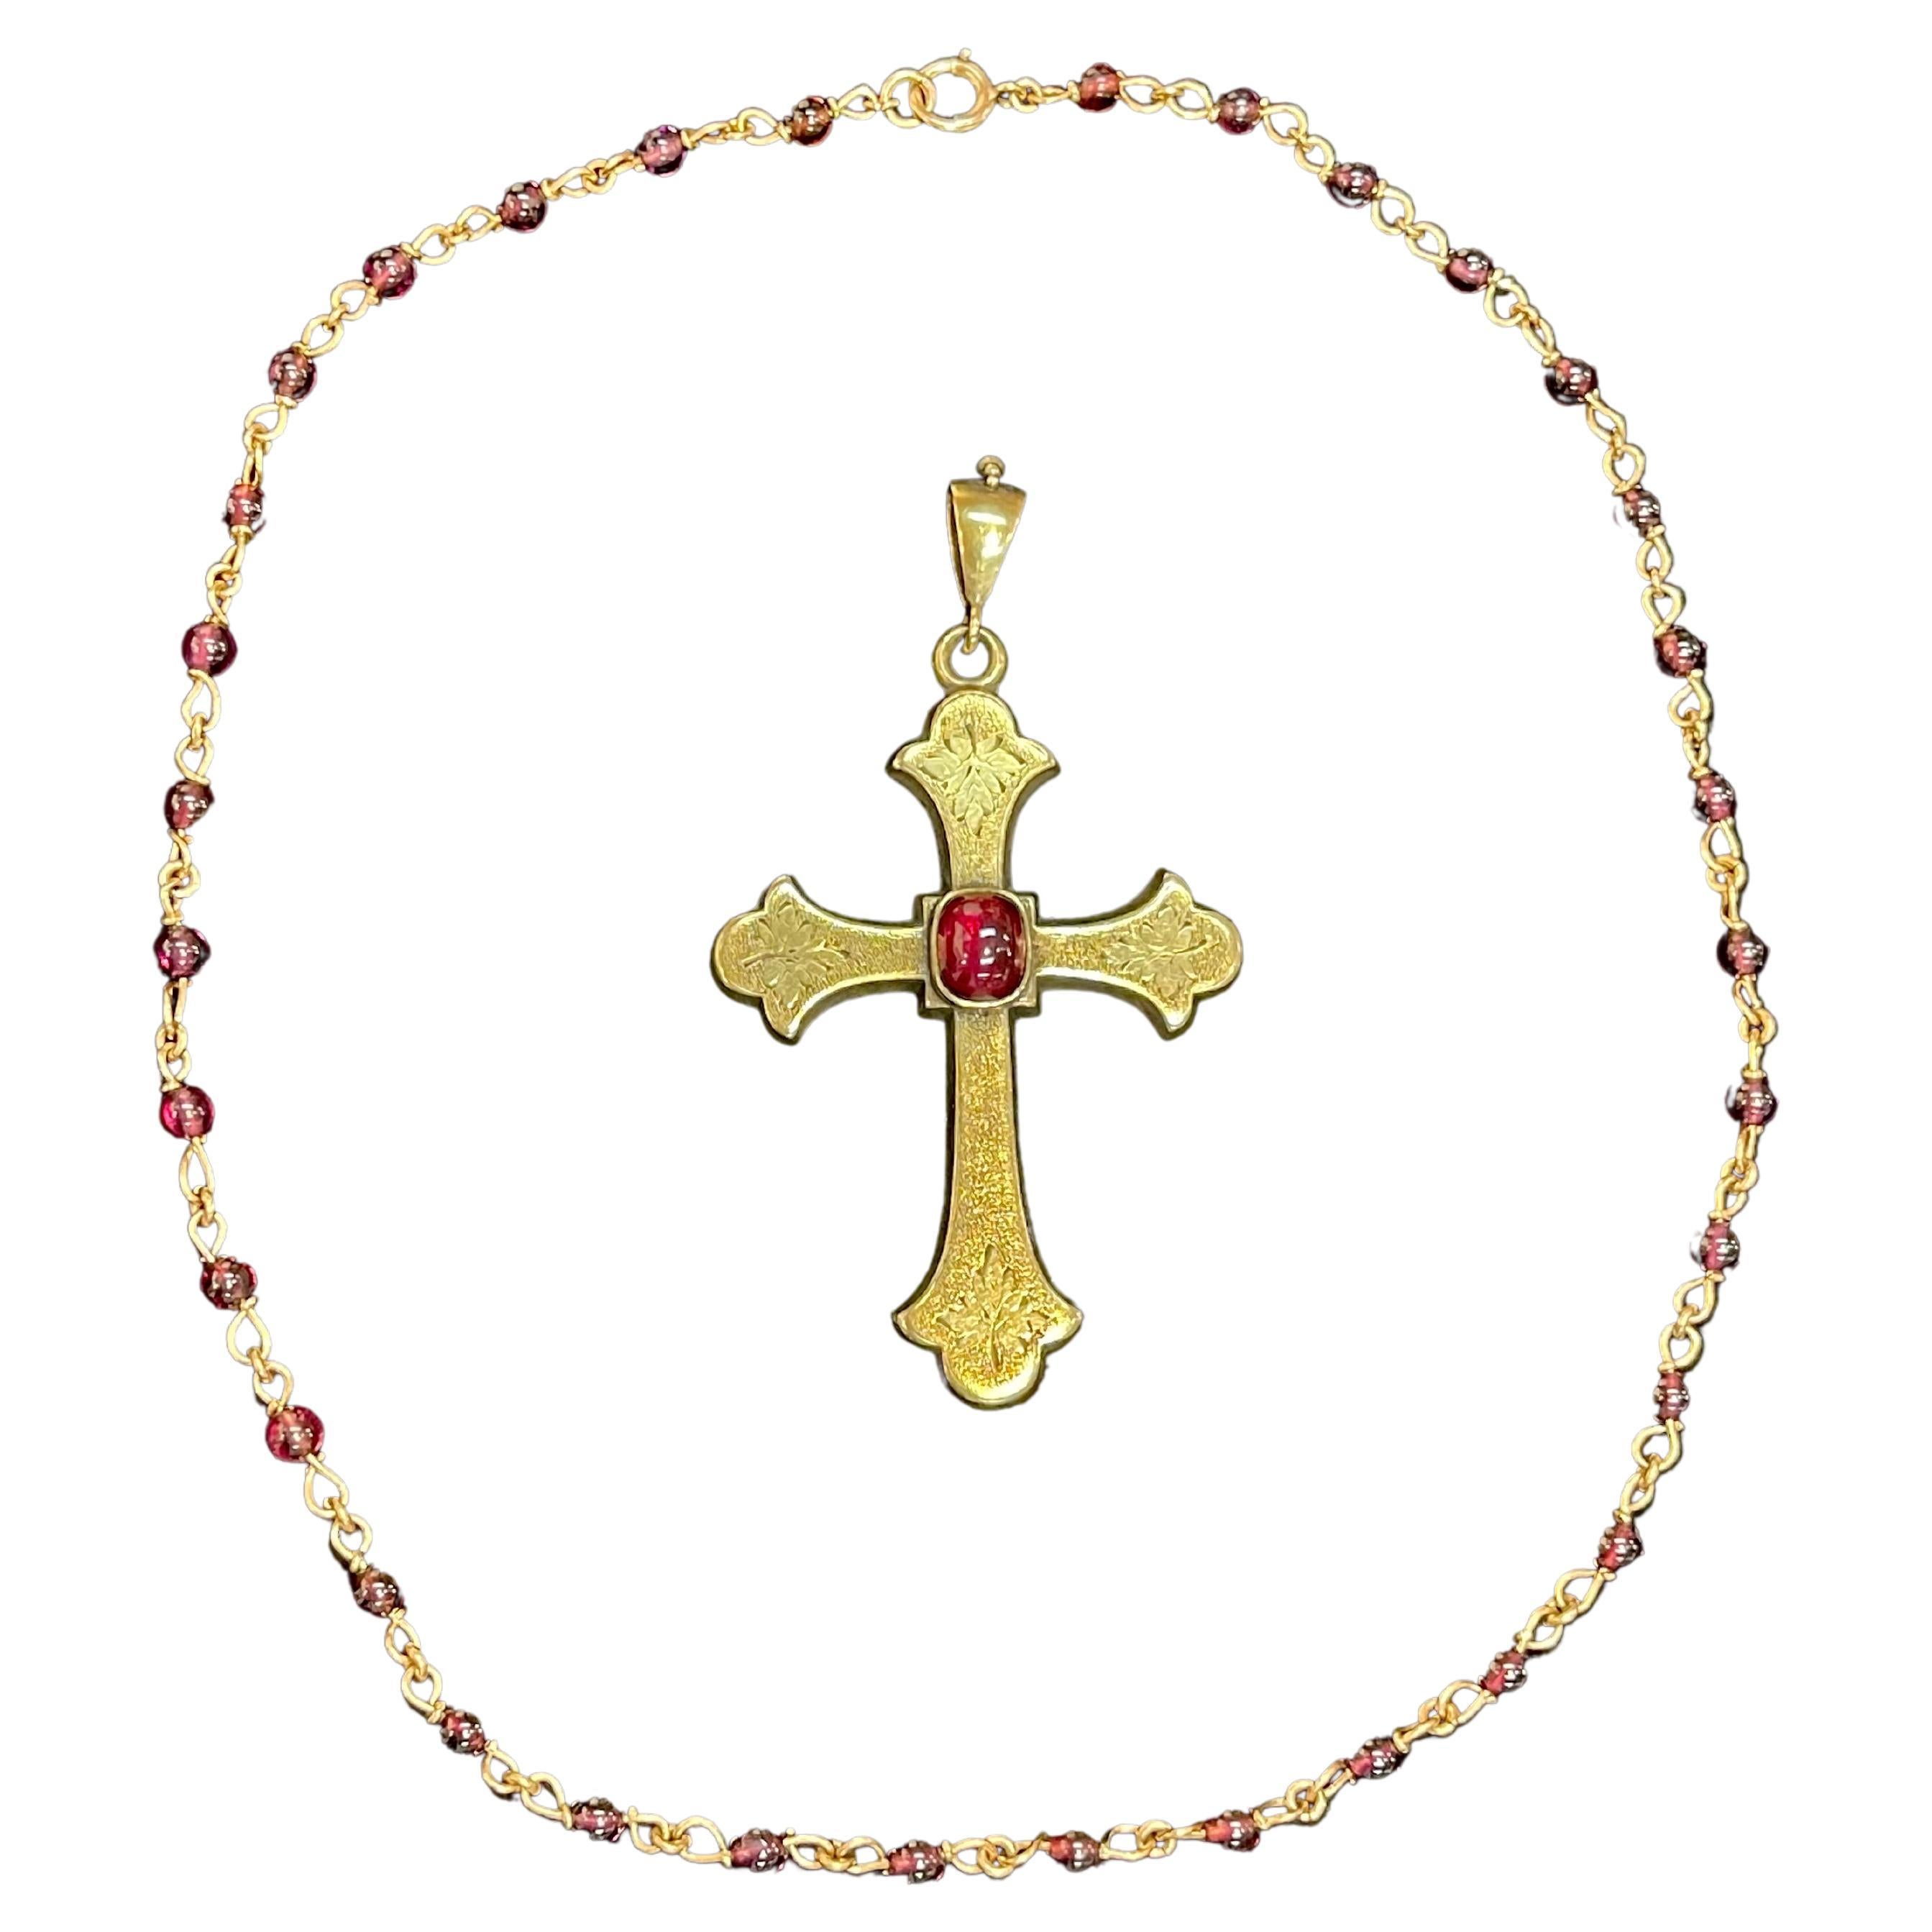 Antique Gold and Garnet Vintage Statement Cross Pendant and Necklace For Sale